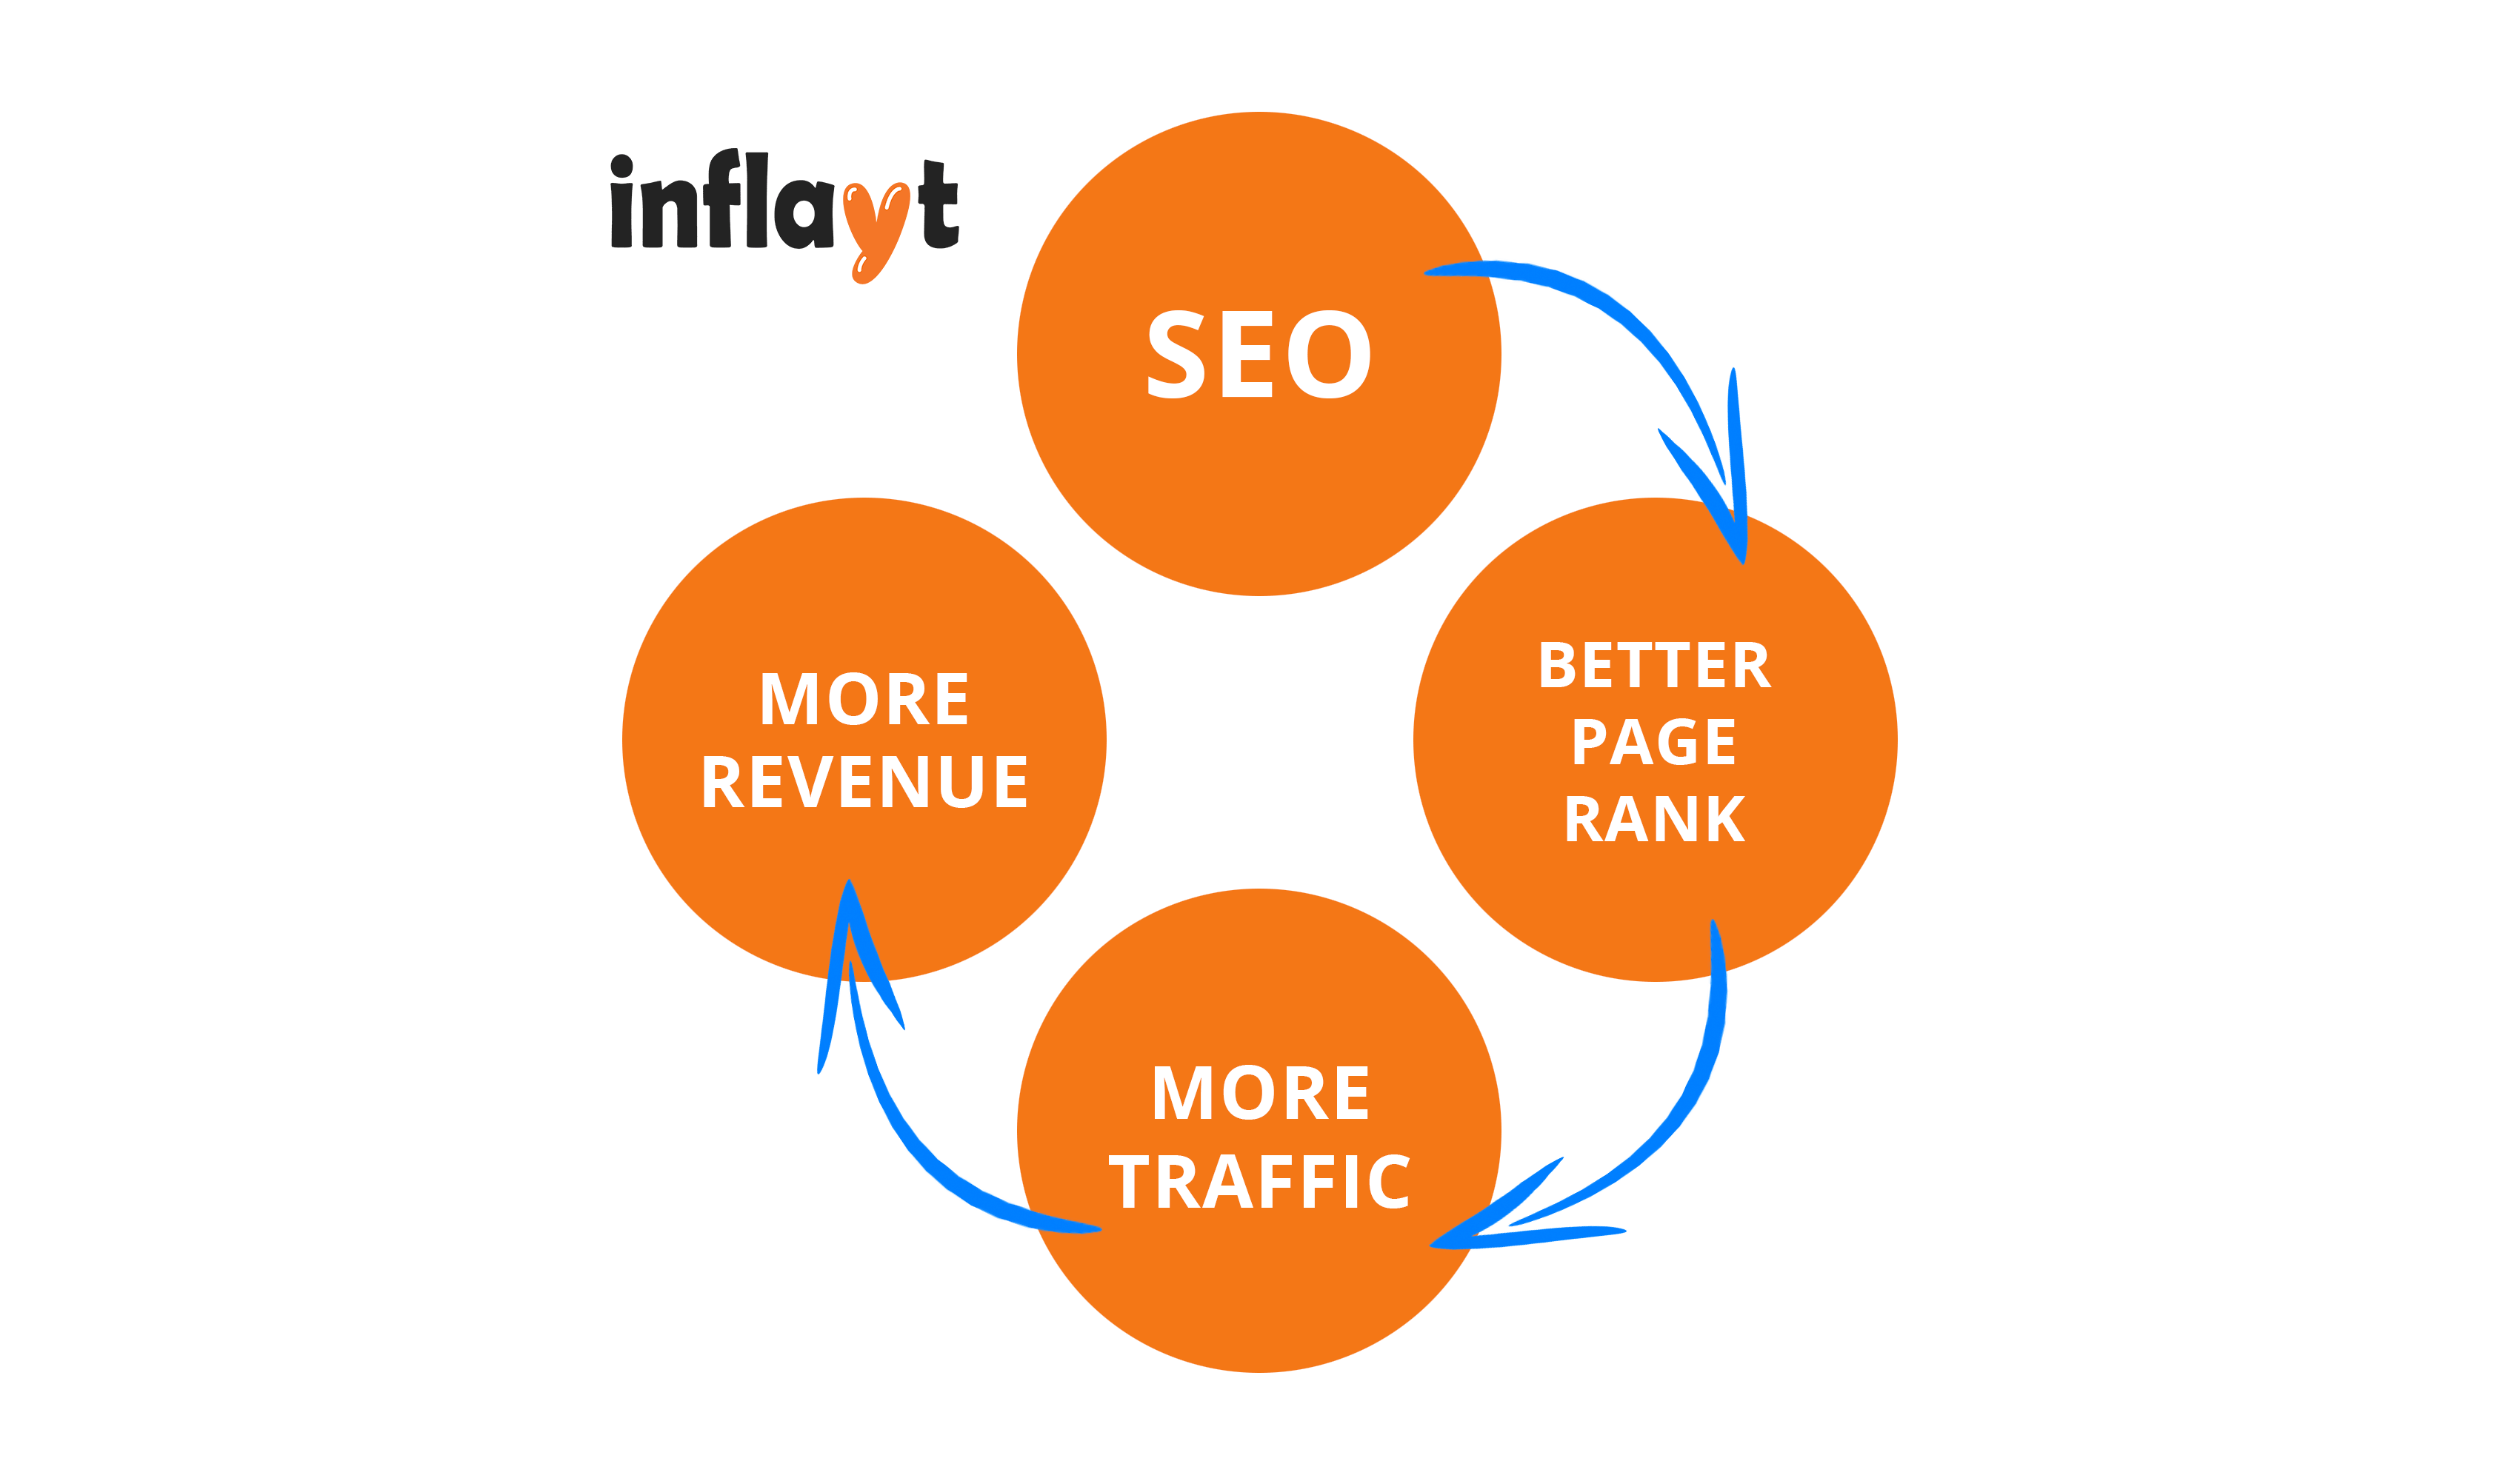 Inflayt SEO Process